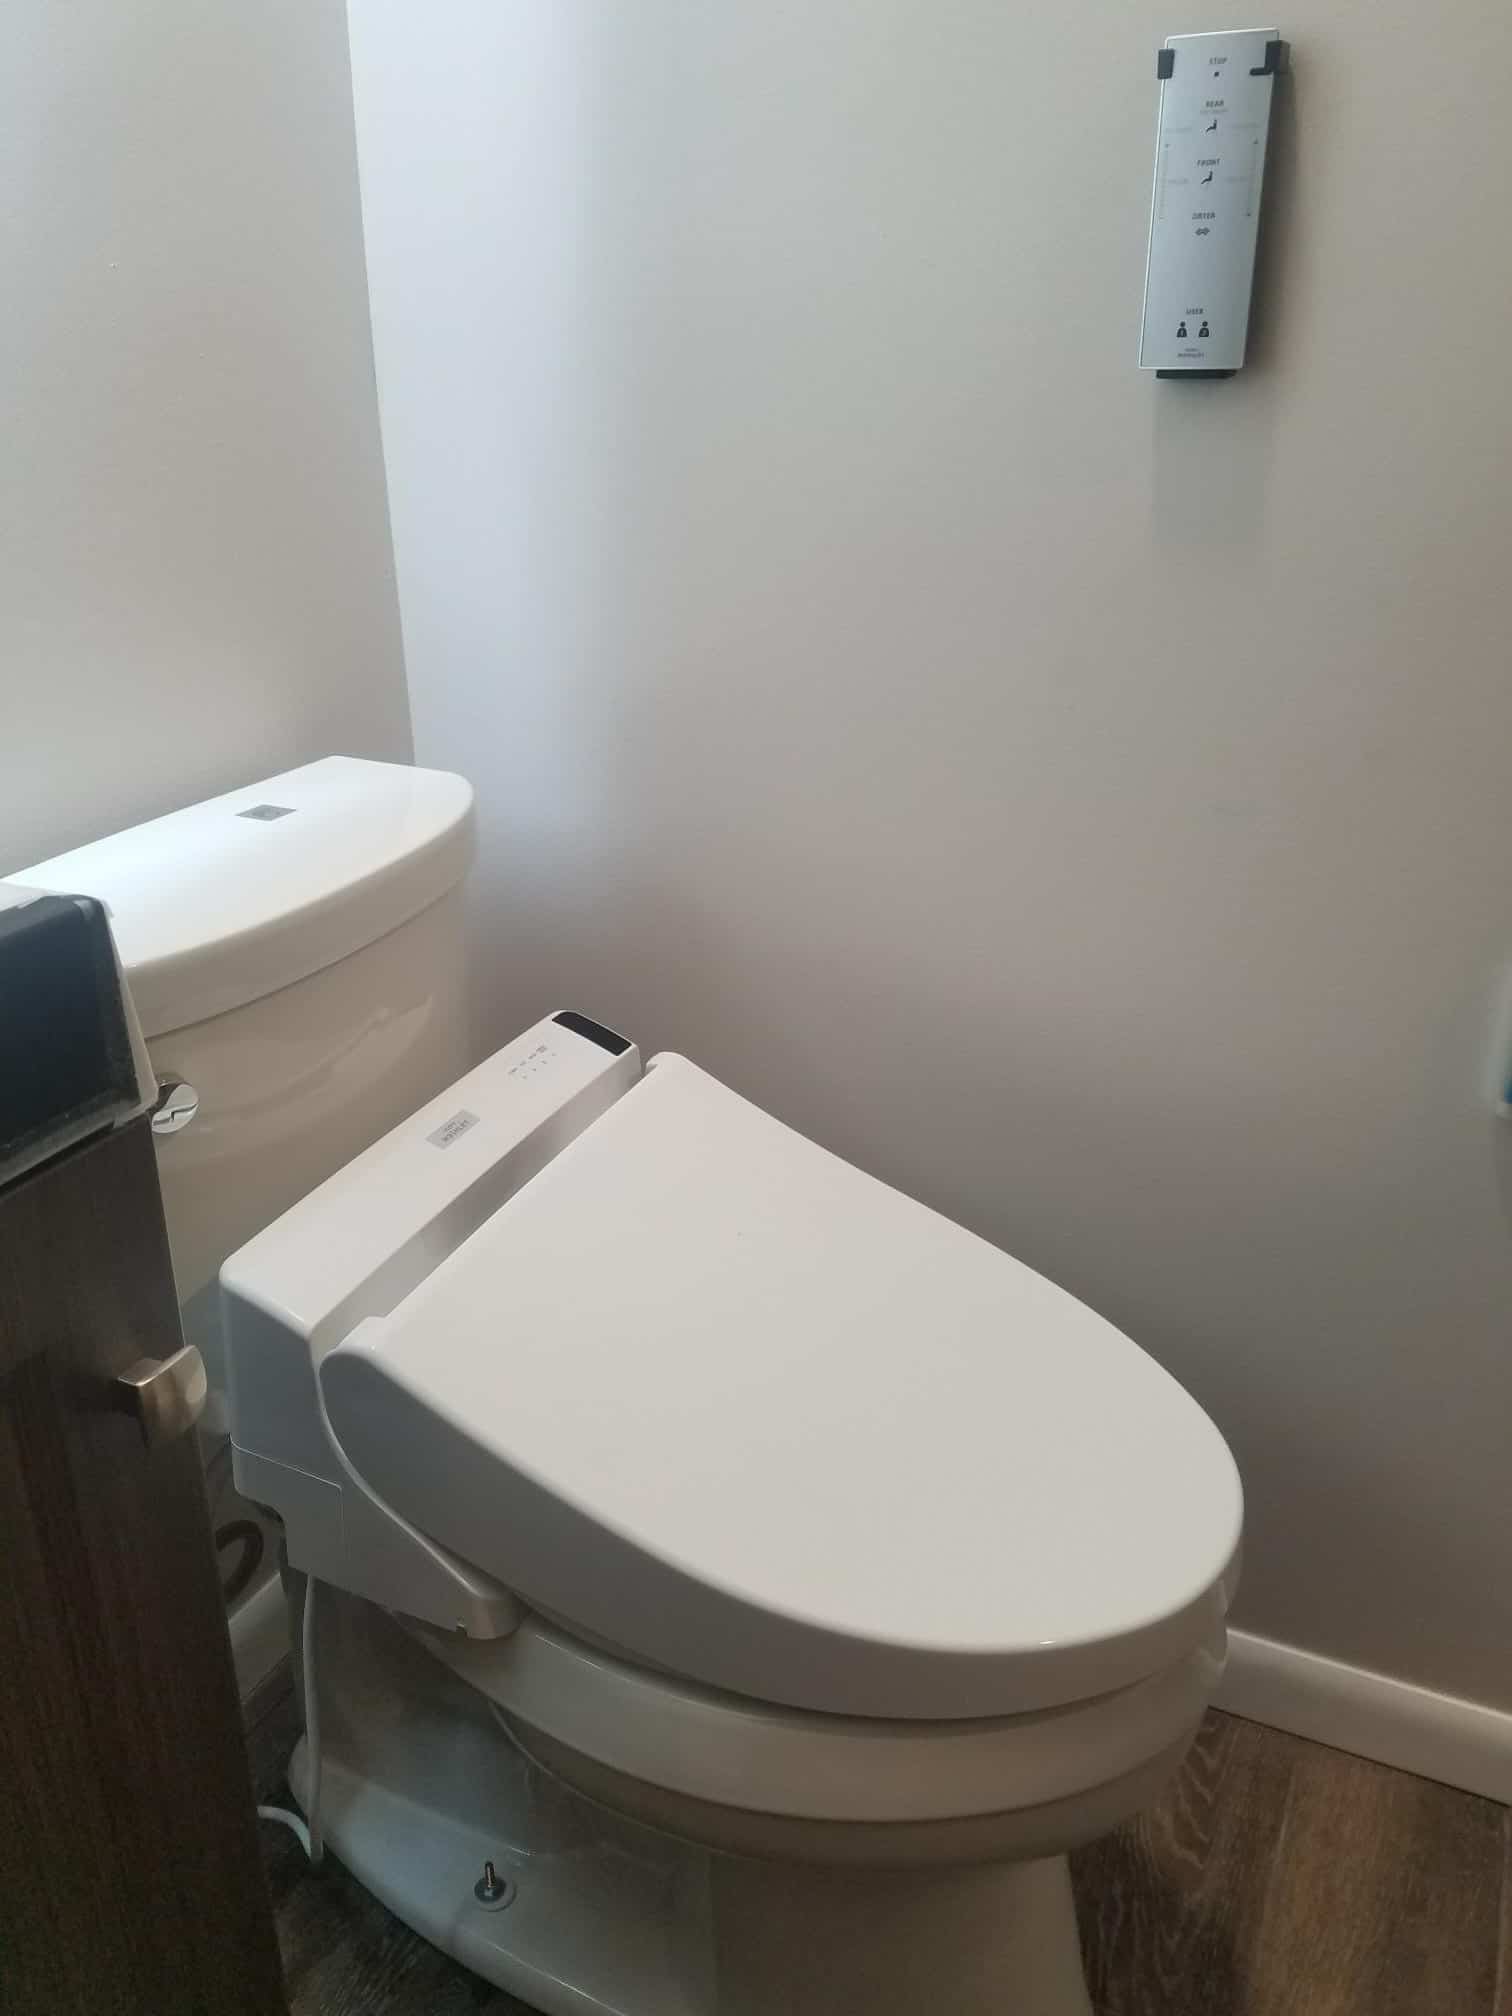 motion-activated-bidet-and-toilet